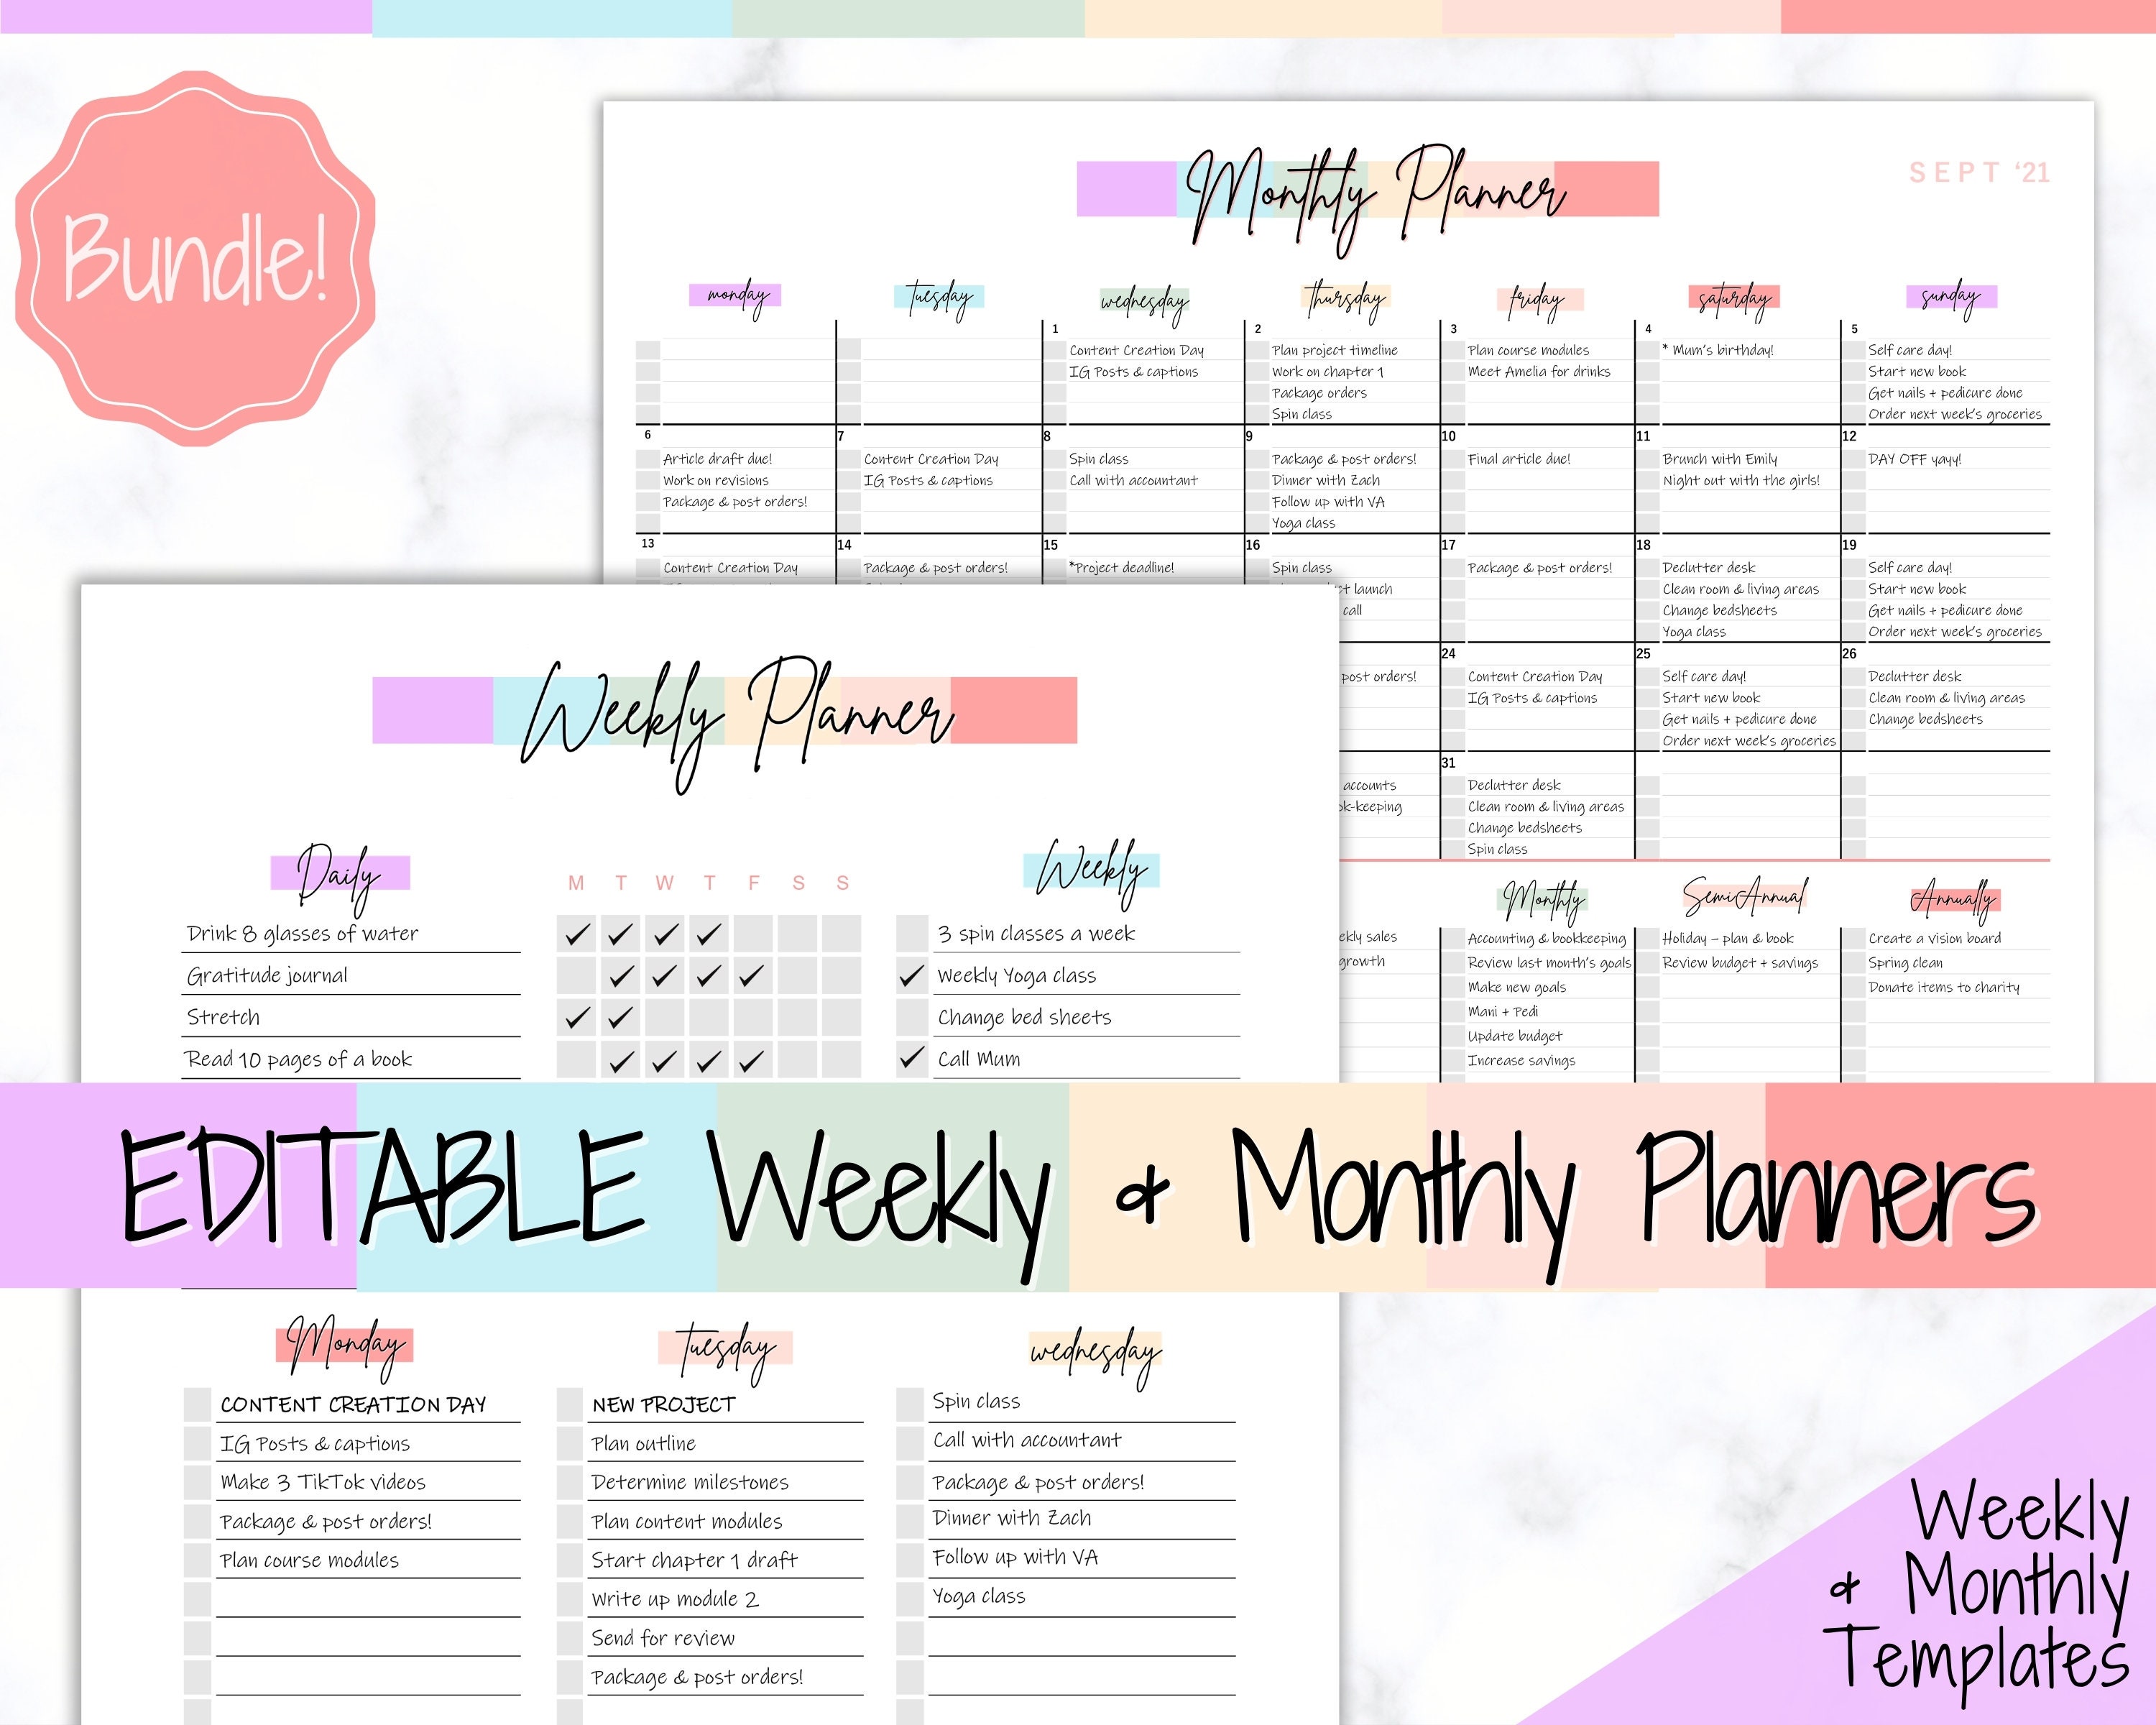 Student Planner Weekly & Monthly Planners Weekly | Etsy